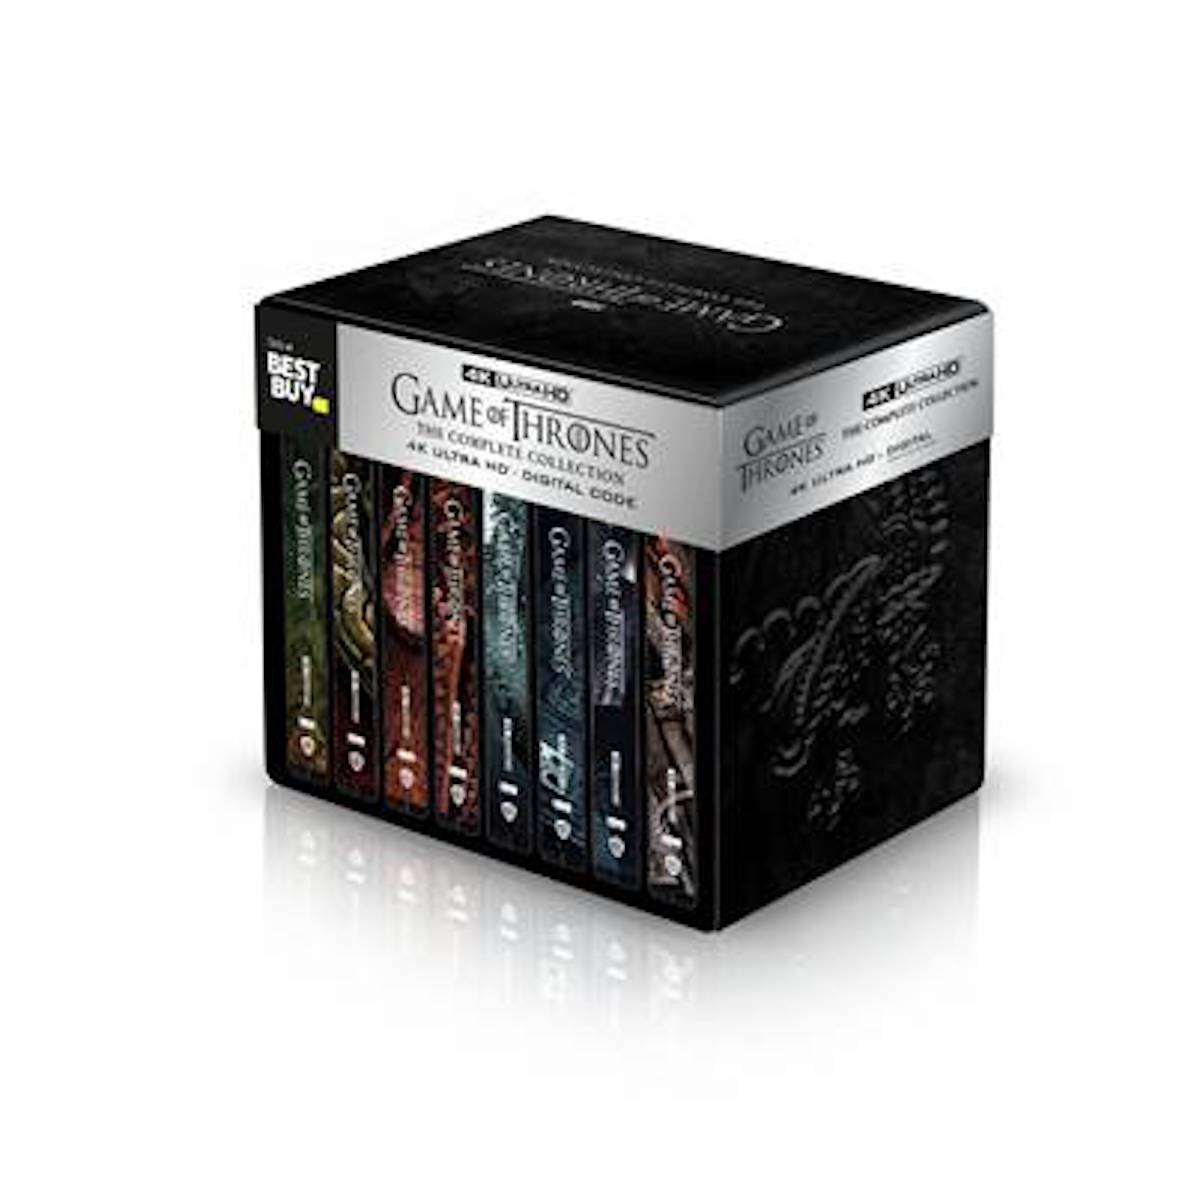 Game of Thrones: The Complete Collection